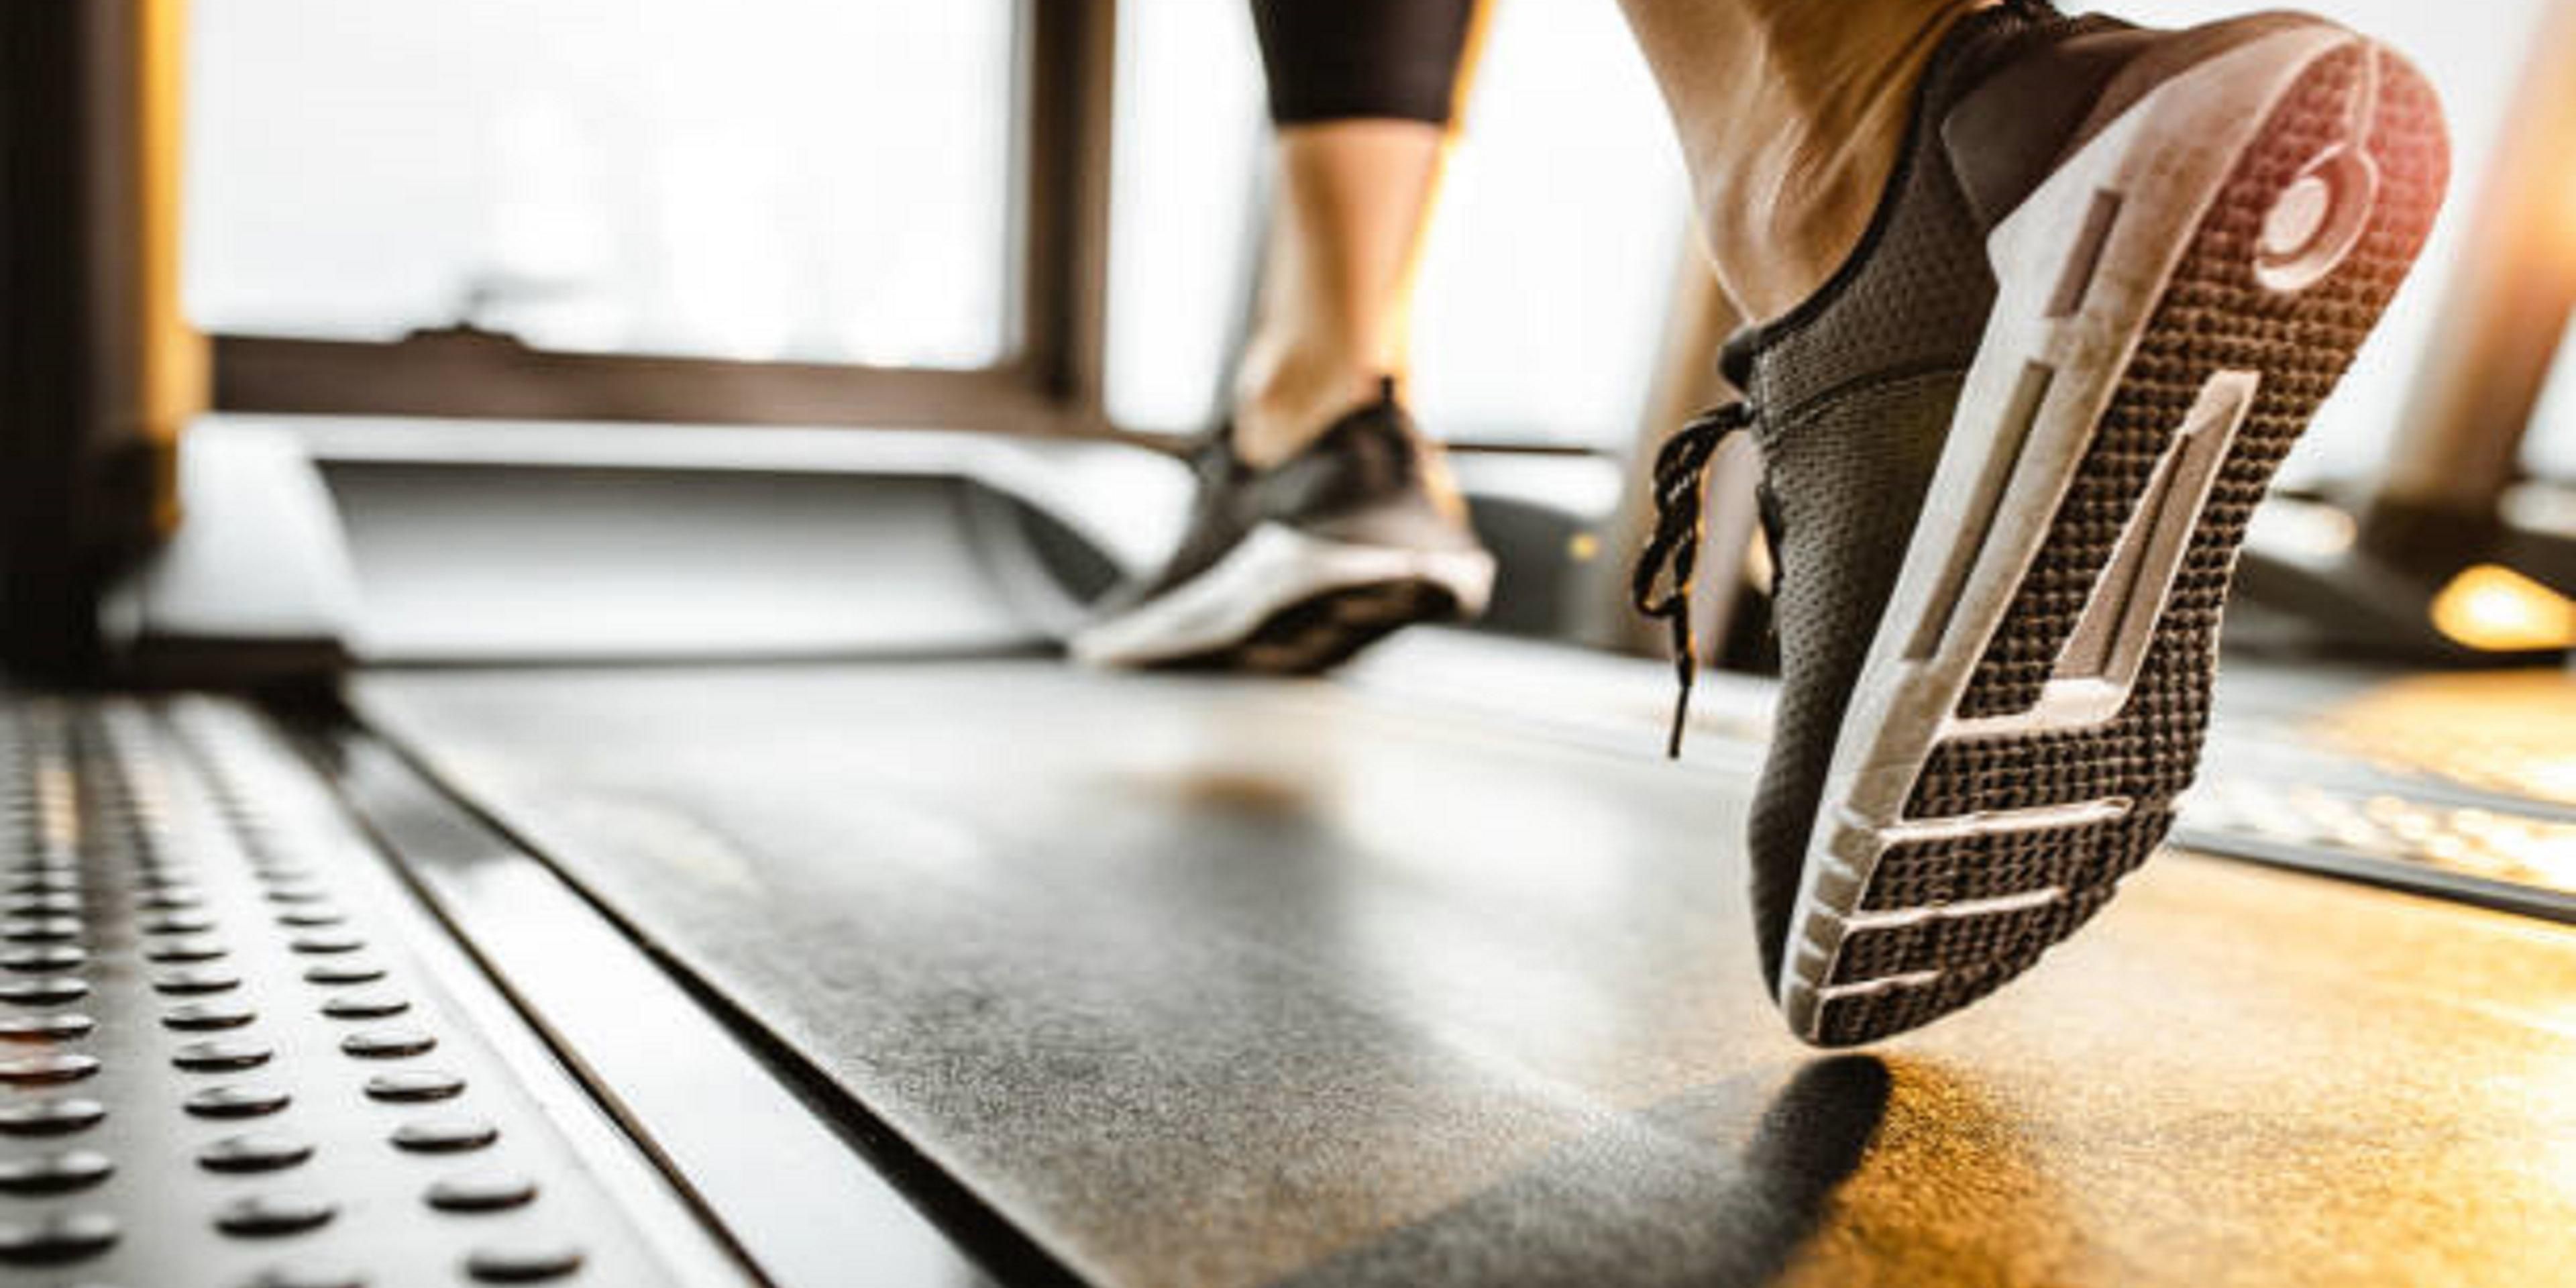 Get your sweat on in our complimentary, fully equipped Fitness Center with treadmill, stair stepper, and stationary bike. Our Fitness Center is open 24 hours for your convenience!